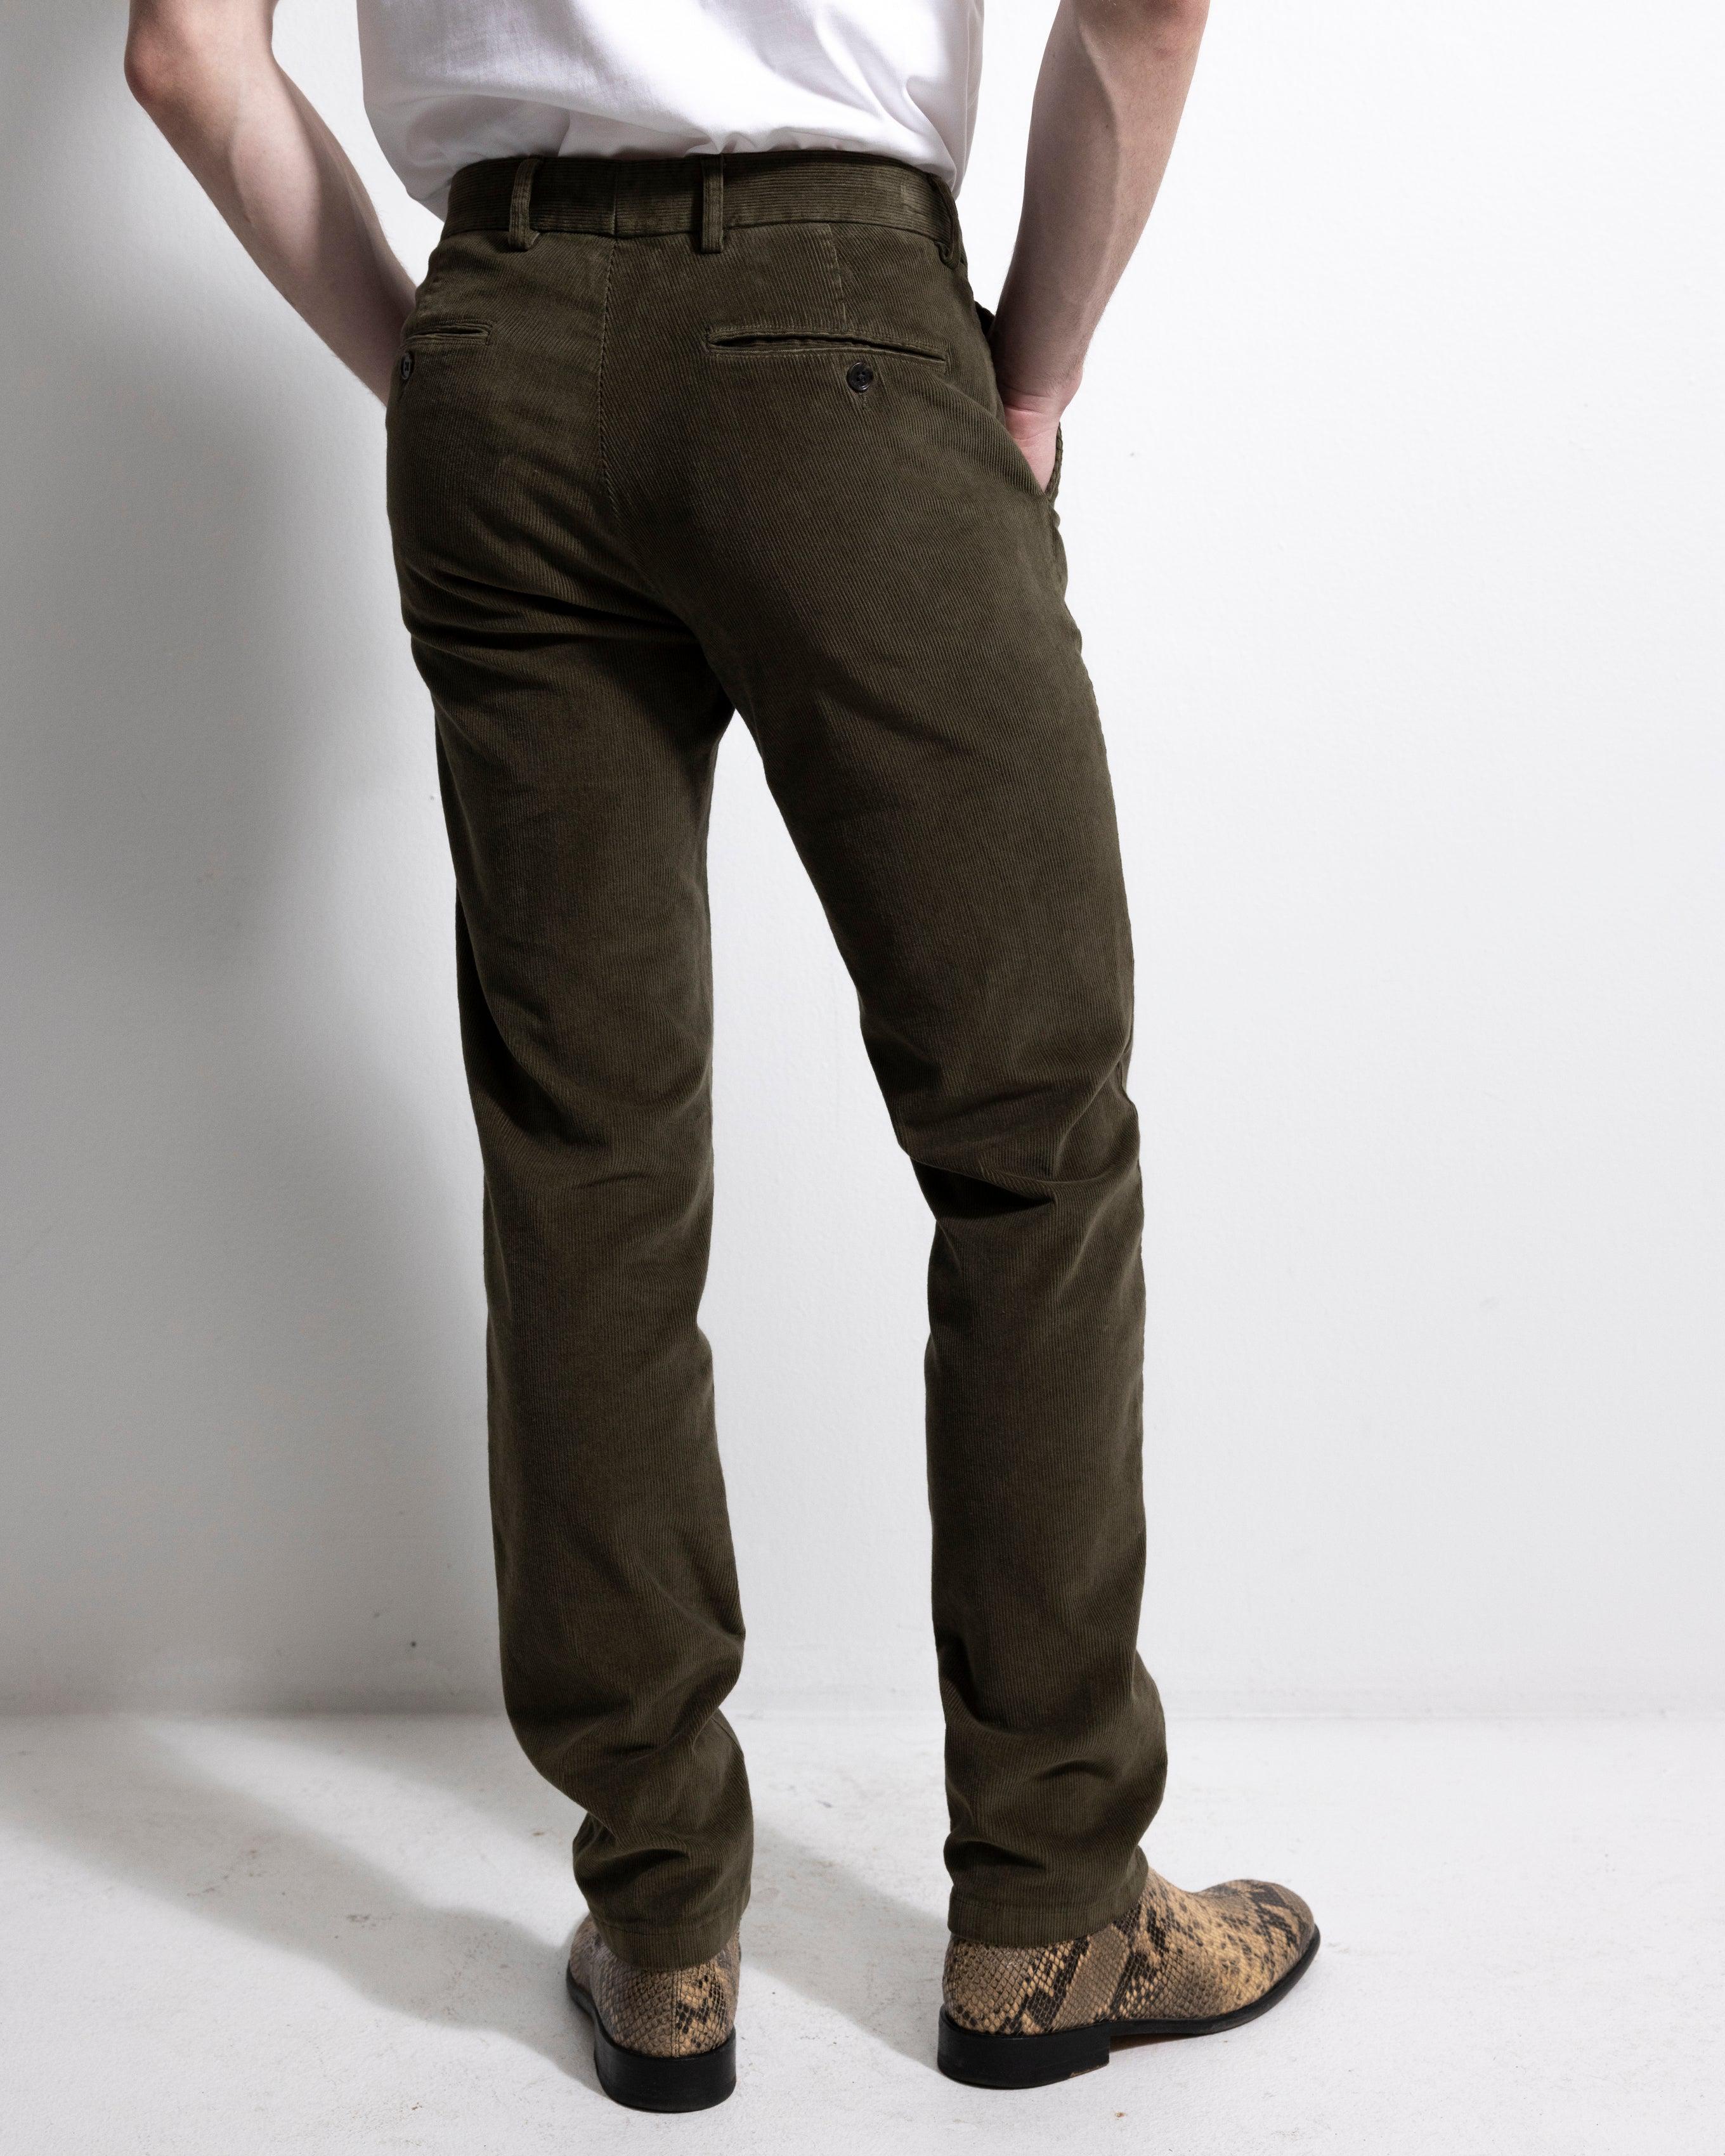 Trousers Cord - Dk Olive Green-Ljung by Marcus Larsson